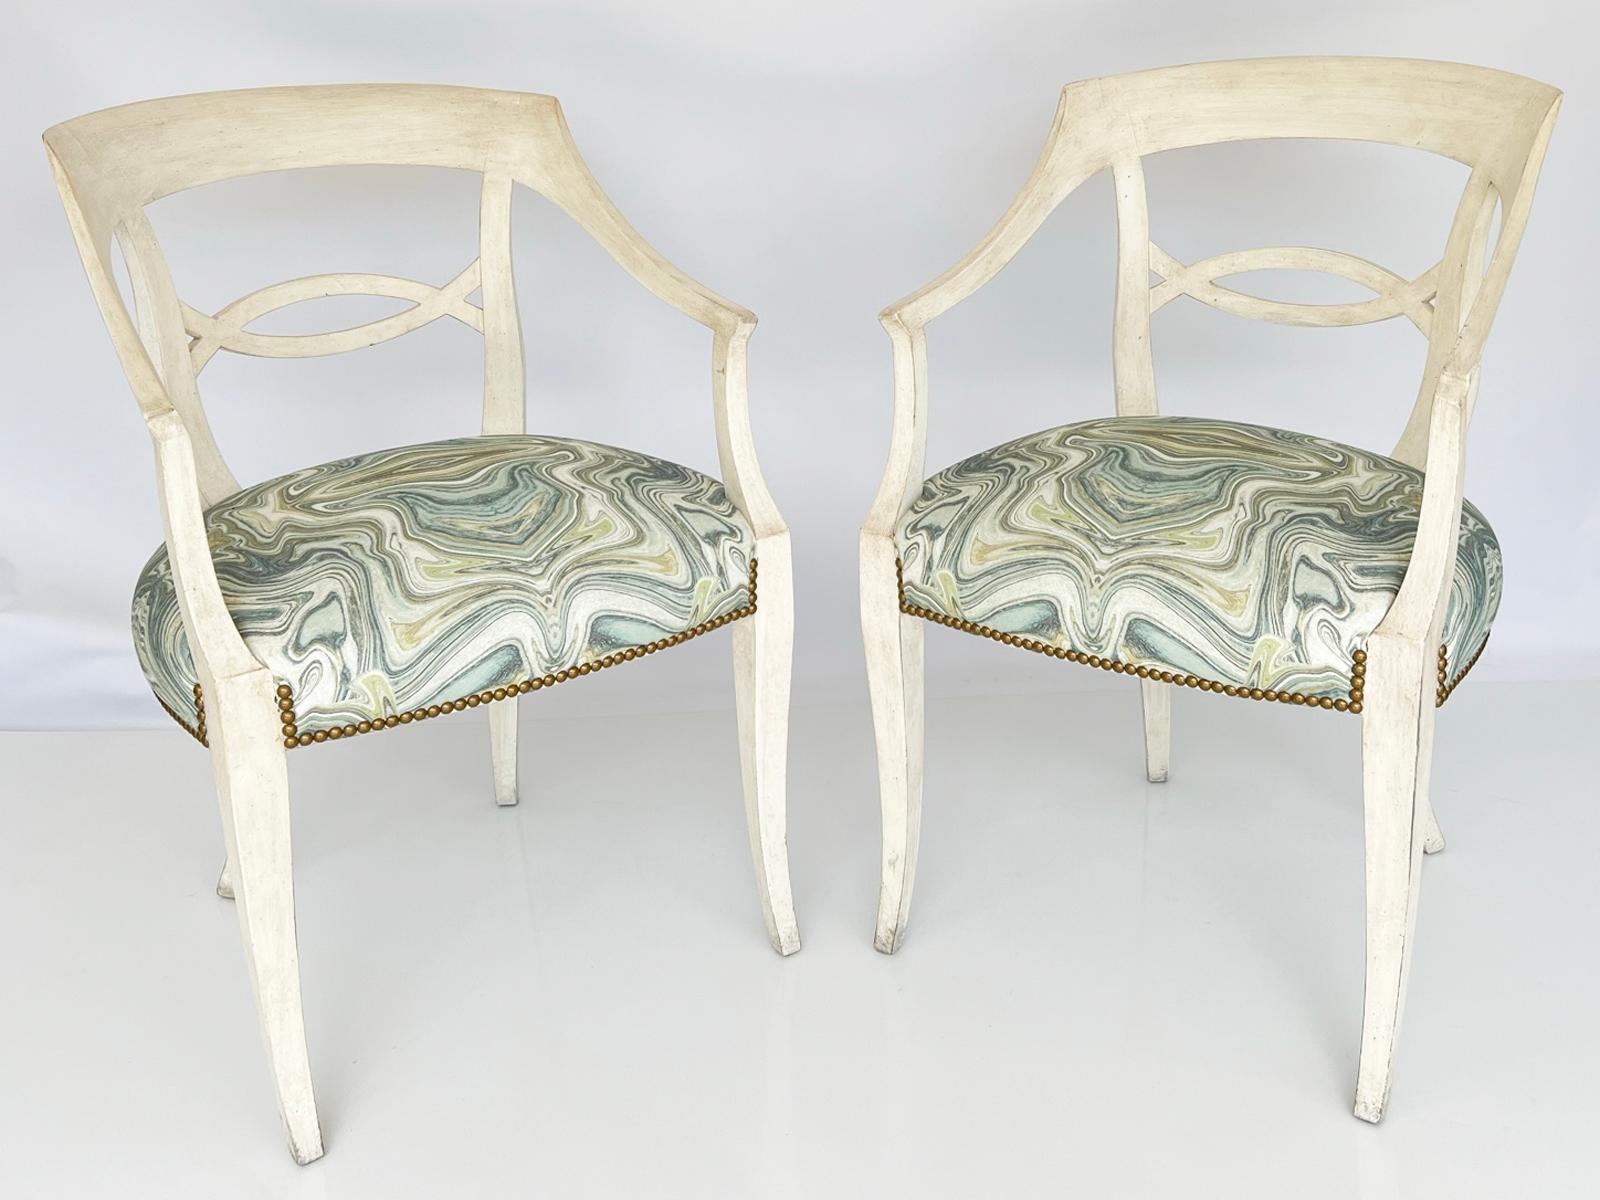 Pair of armchairs, by Baker, each having an ivory painted finish showing natural wear, its bowed backrest extending to outswept arms, flanking the arched and crossed backsplat, over a crown seat, upholstered with nailheads, and raised on